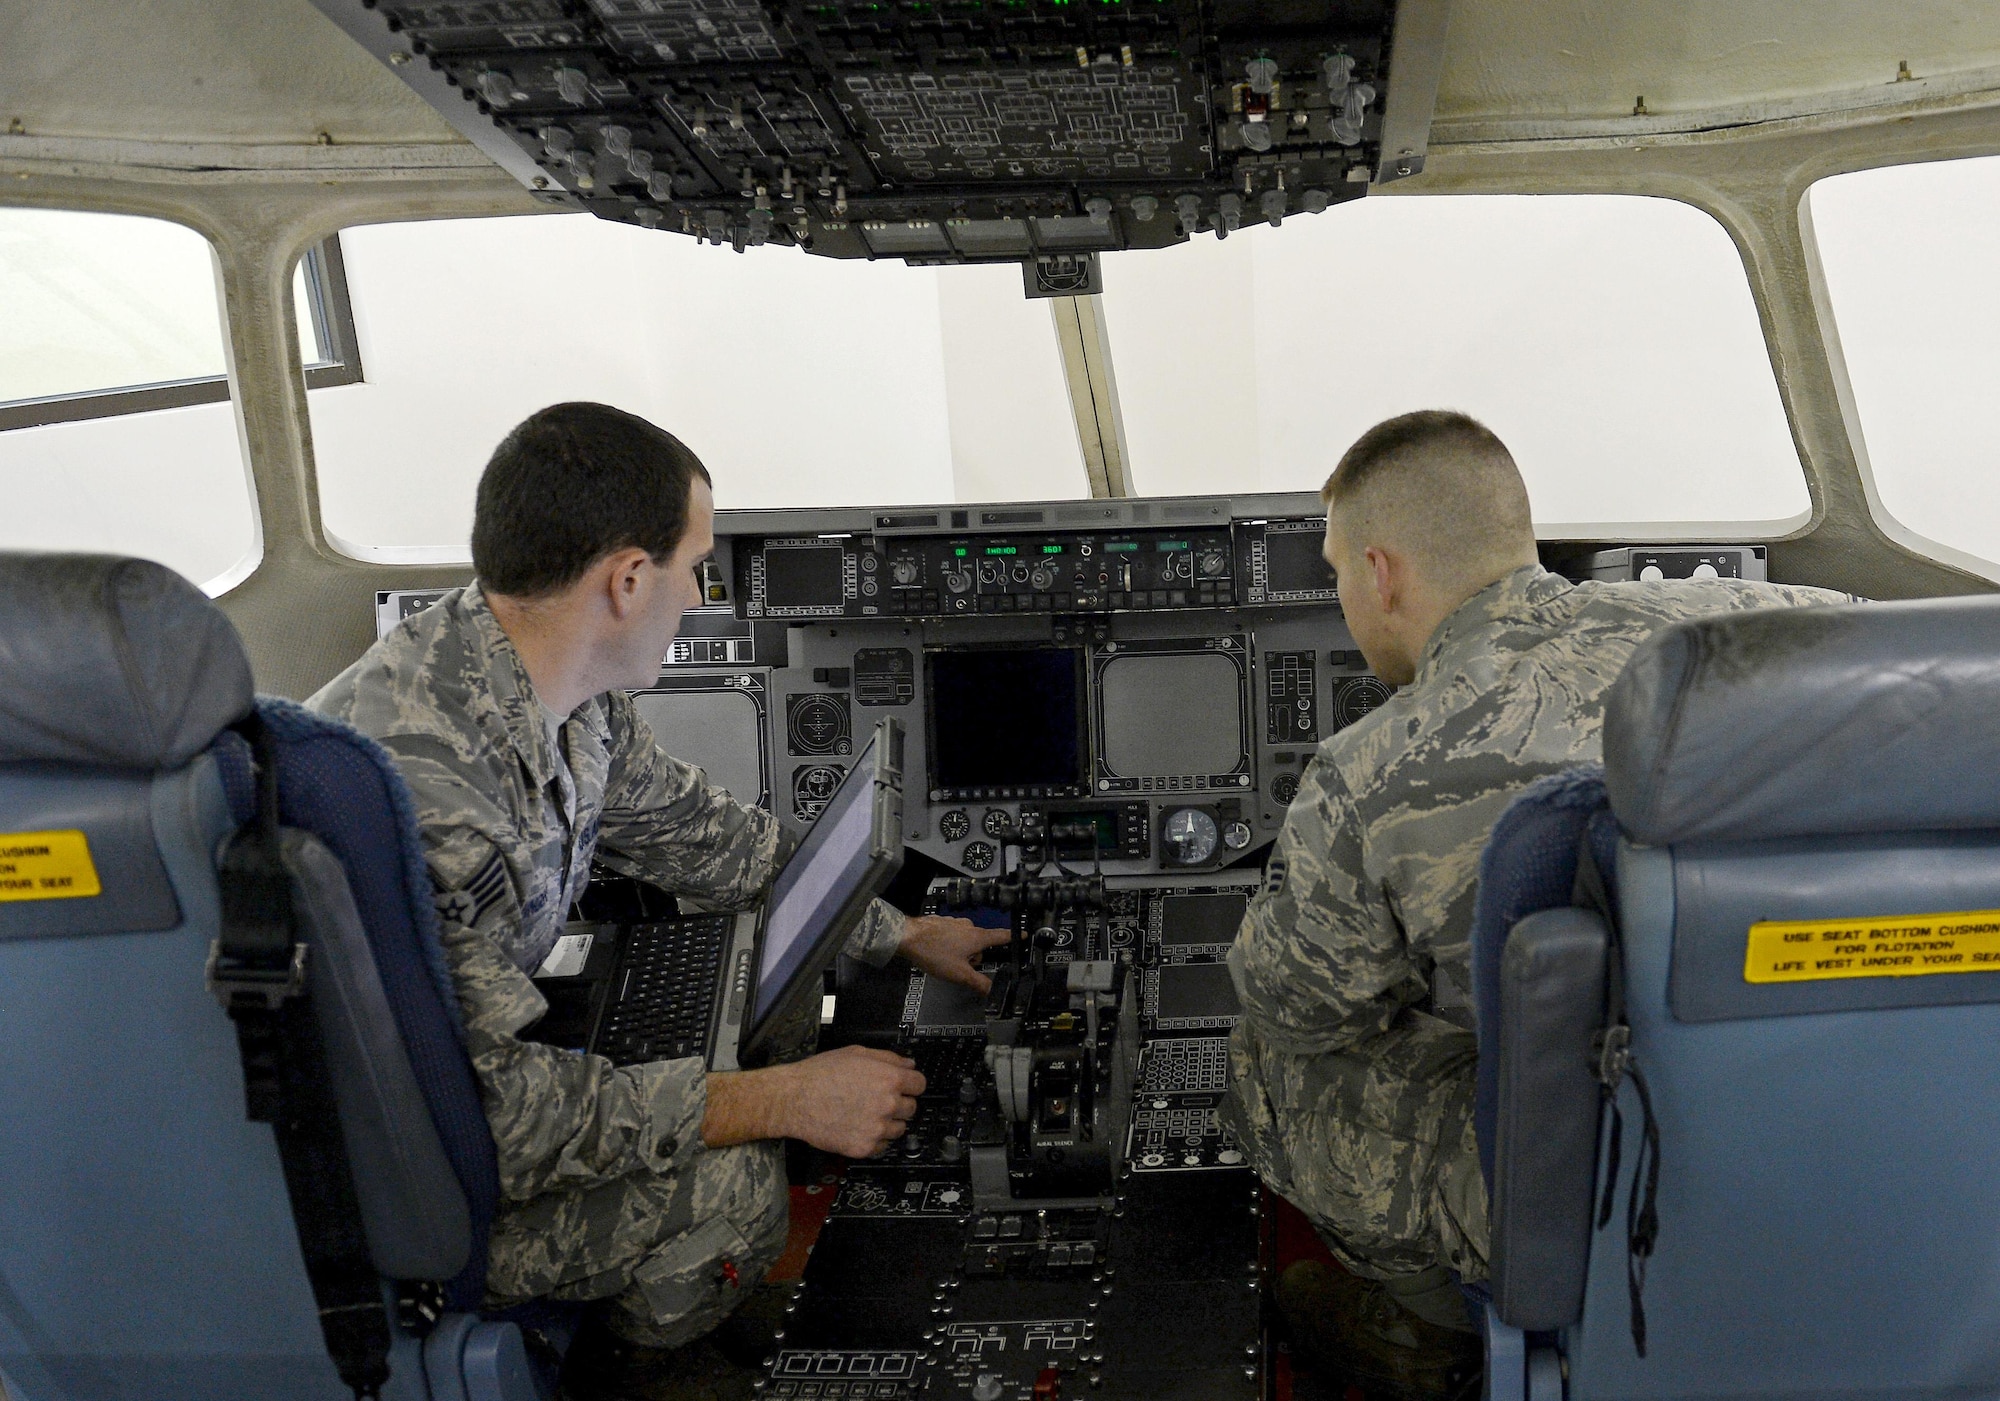 Staff Sgt. Kyle Stringer (left), 373rd Training Squadron field training detachment instructor, teaches Senior Airman Shawn Carnline, 62nd Aircraft Maintenance crew chief, about flight controls Jan. 19, 2017 at Joint Base Lewis McChord, Wash. Any maintenance personnel that work on aircraft stationed here or from other bases can come to the 373 TRS and receive advanced training. (U.S. Air Force photo/Senior Airman Divine Cox)